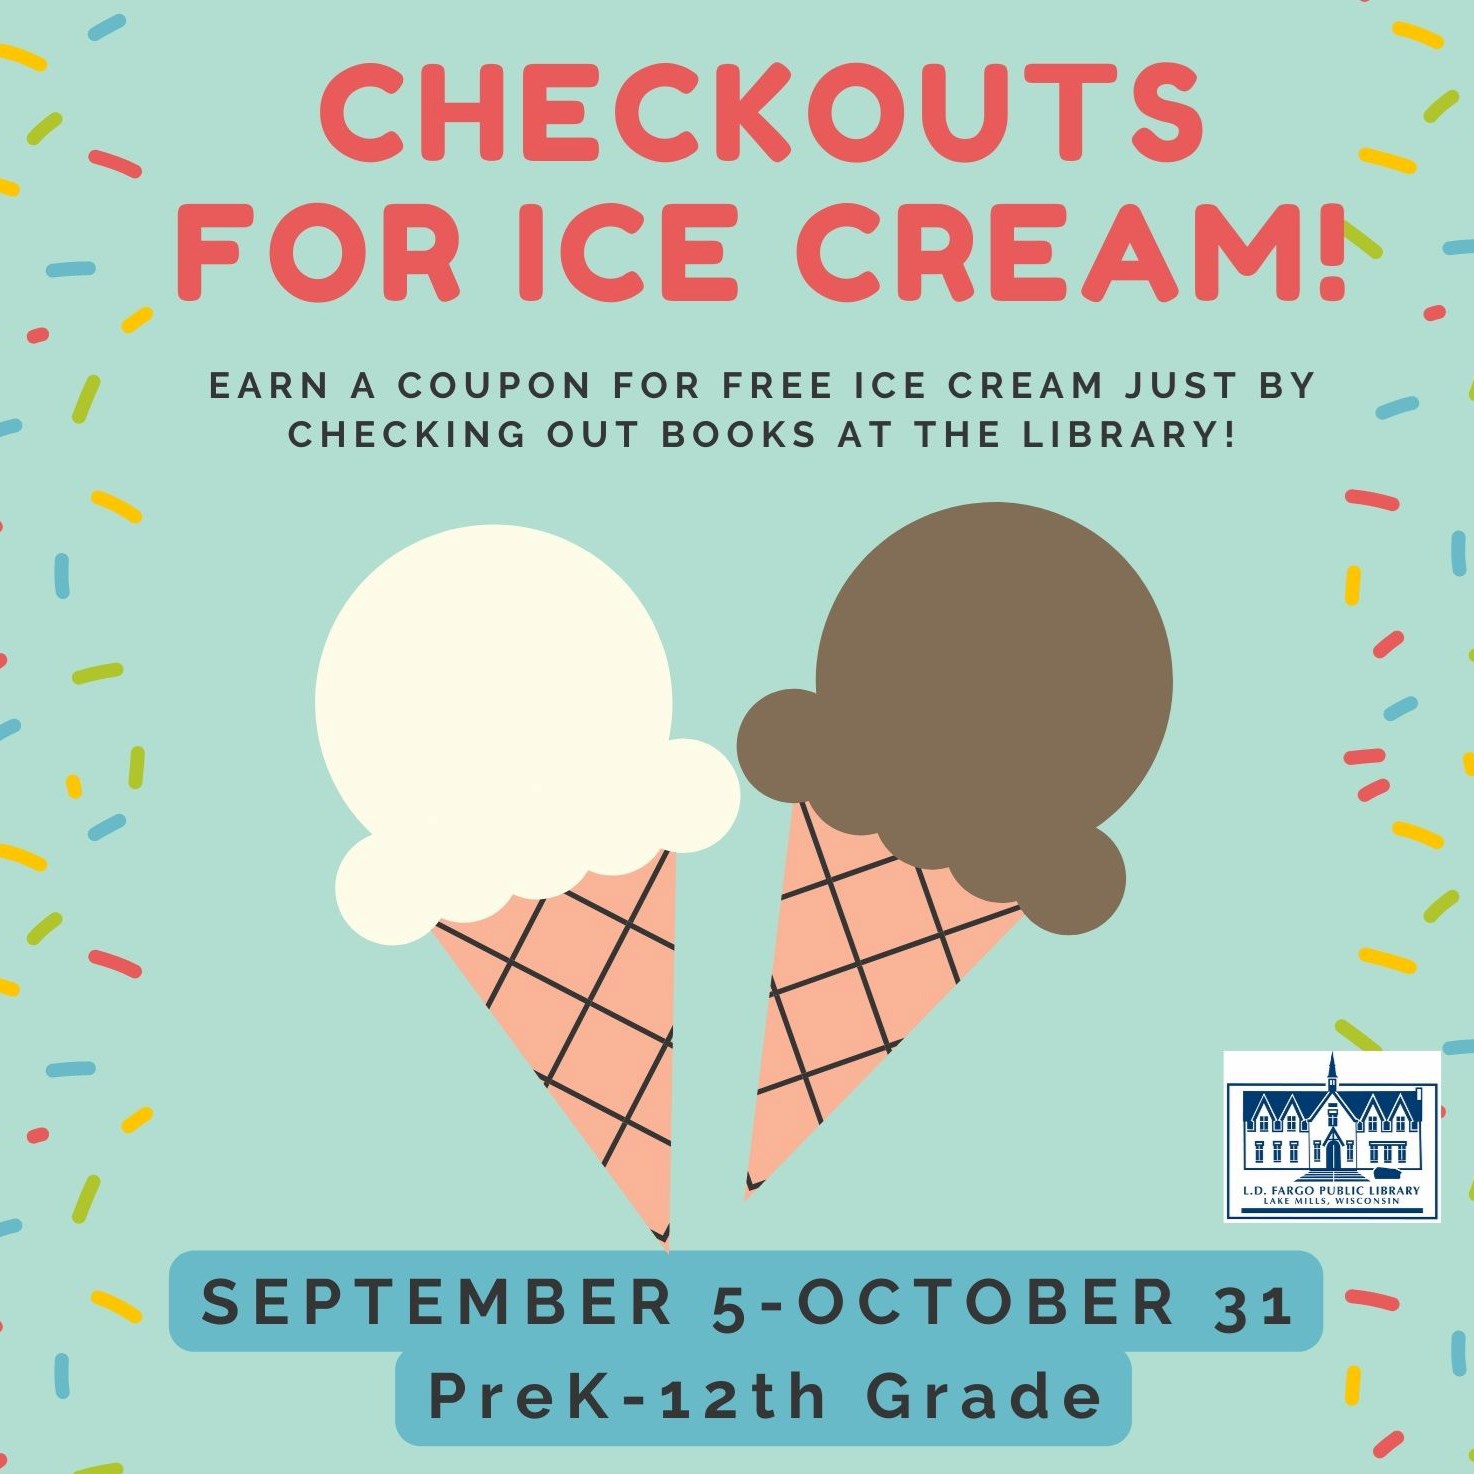 Graphic that reads "Checkouts for ice cream" with two ice cream cones illustrated below.